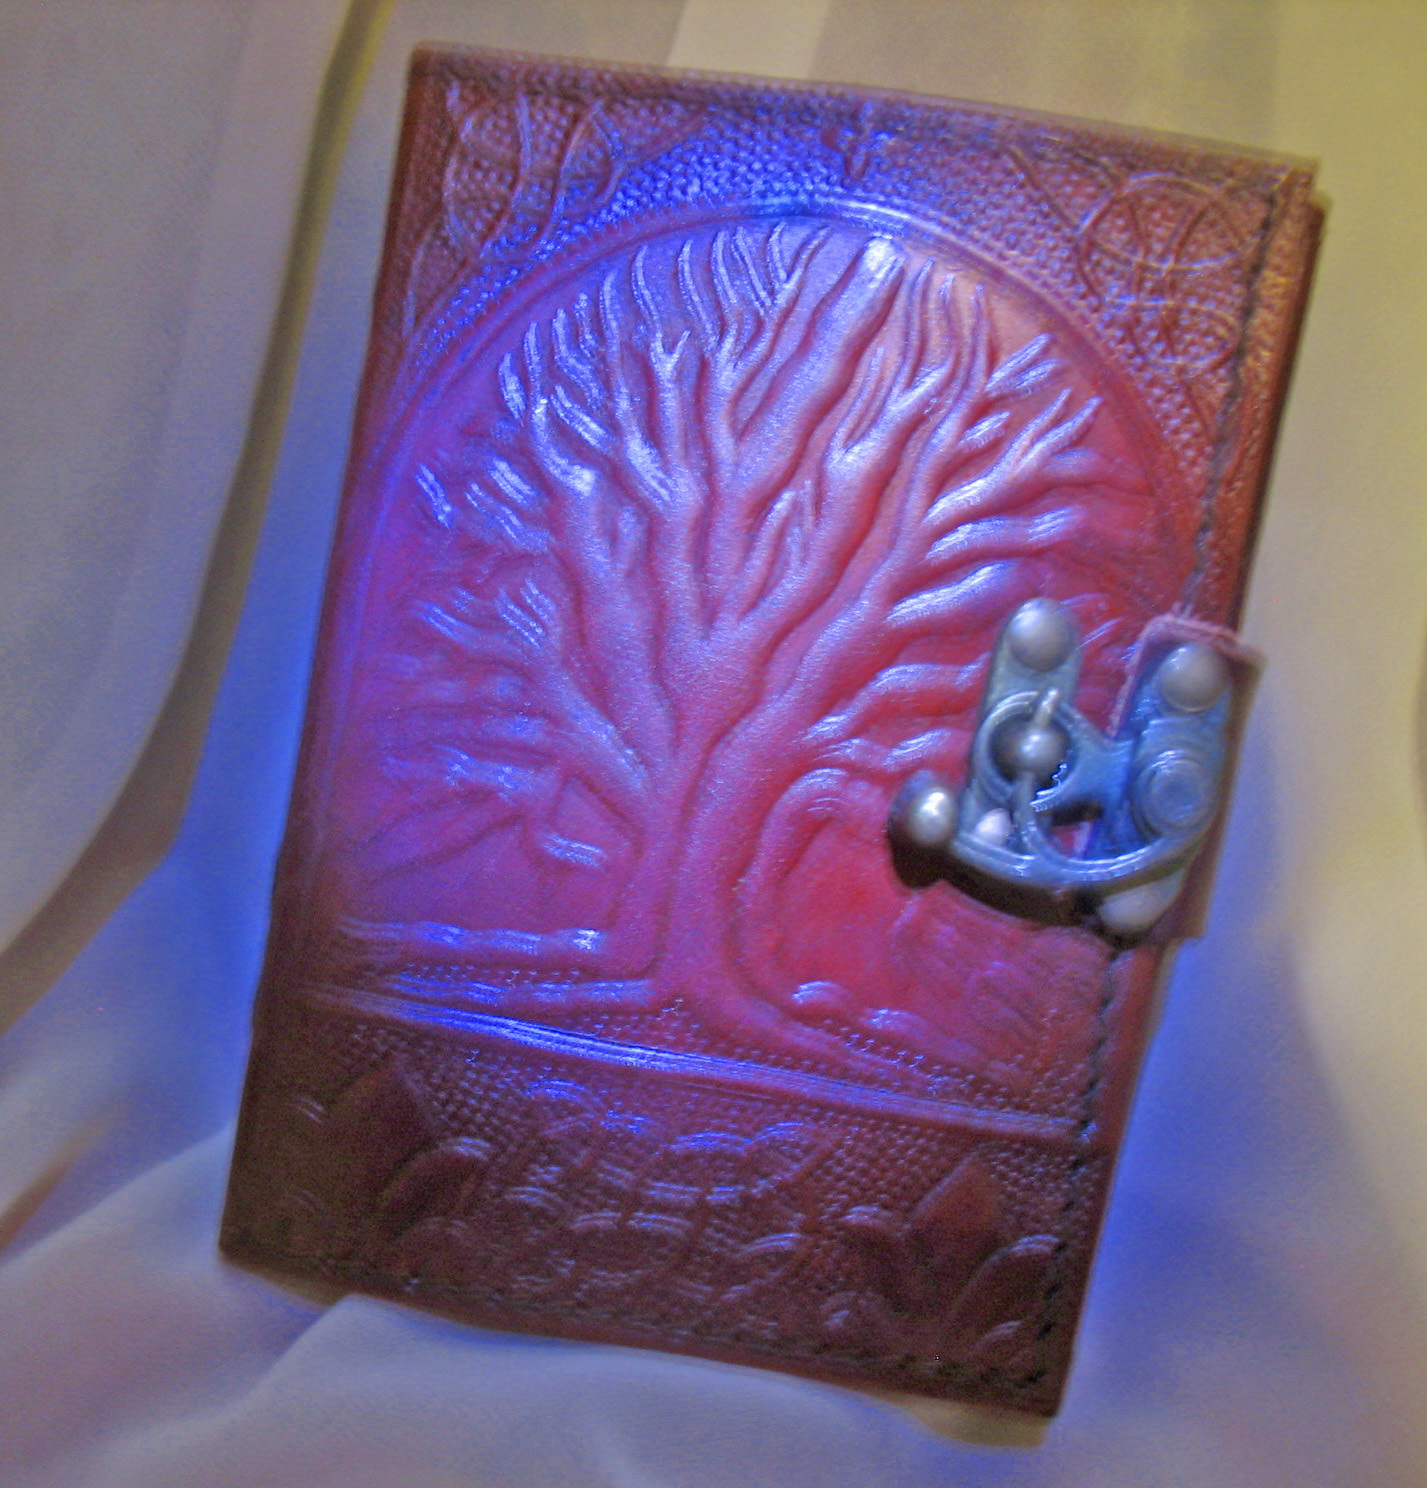 Haunted journal 14X WISHING MAGNIFIER HIGH MAGICK LEATHER BOUND WITCH Cassia4  - $35.00